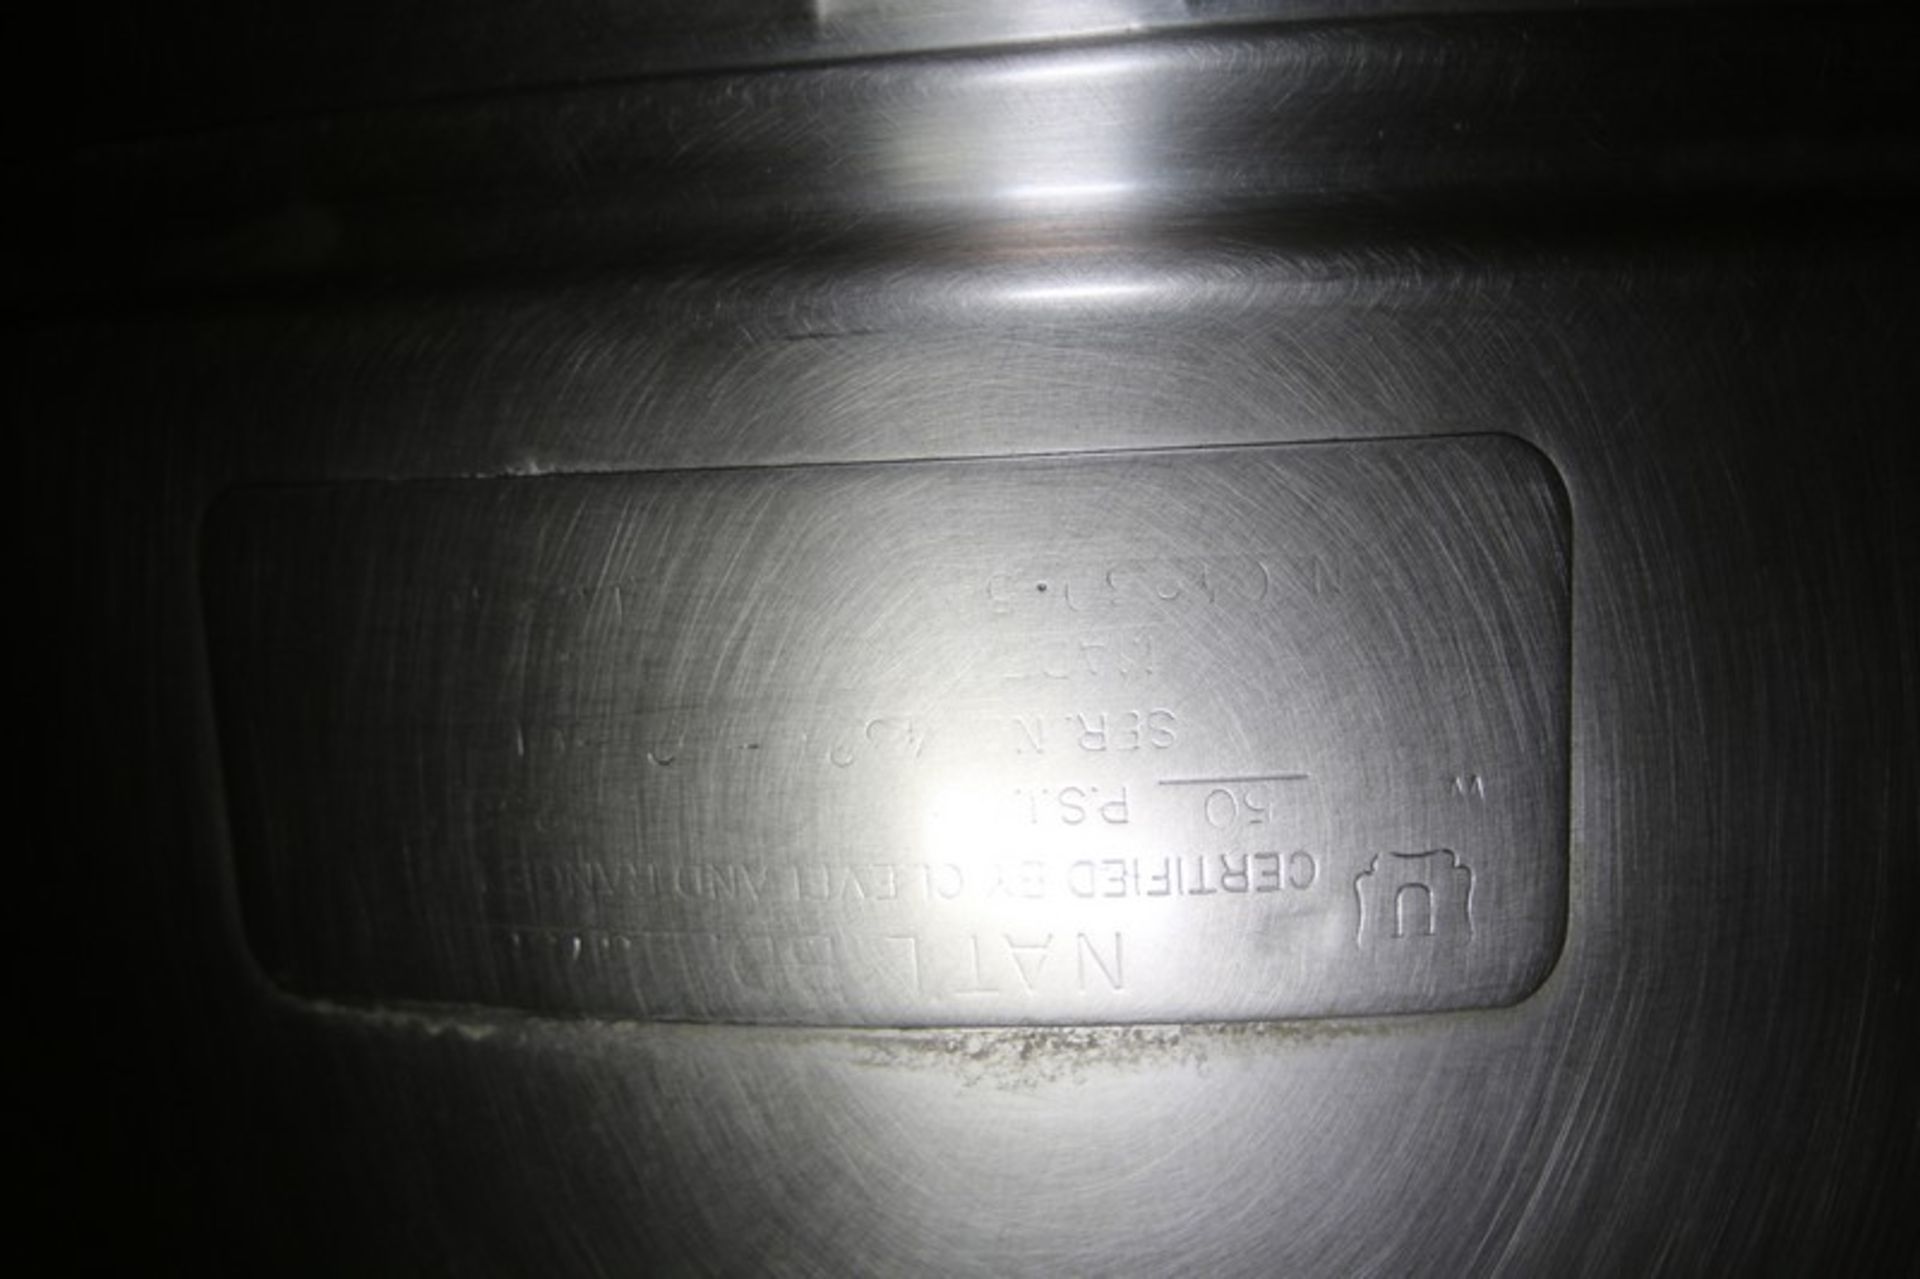 Cleveland Range Aprox. 50 Gal Jacketed Tilting S/S Kettle, Model KLE-40T, SN 4528-53-01, 50 psi ( - Image 6 of 6